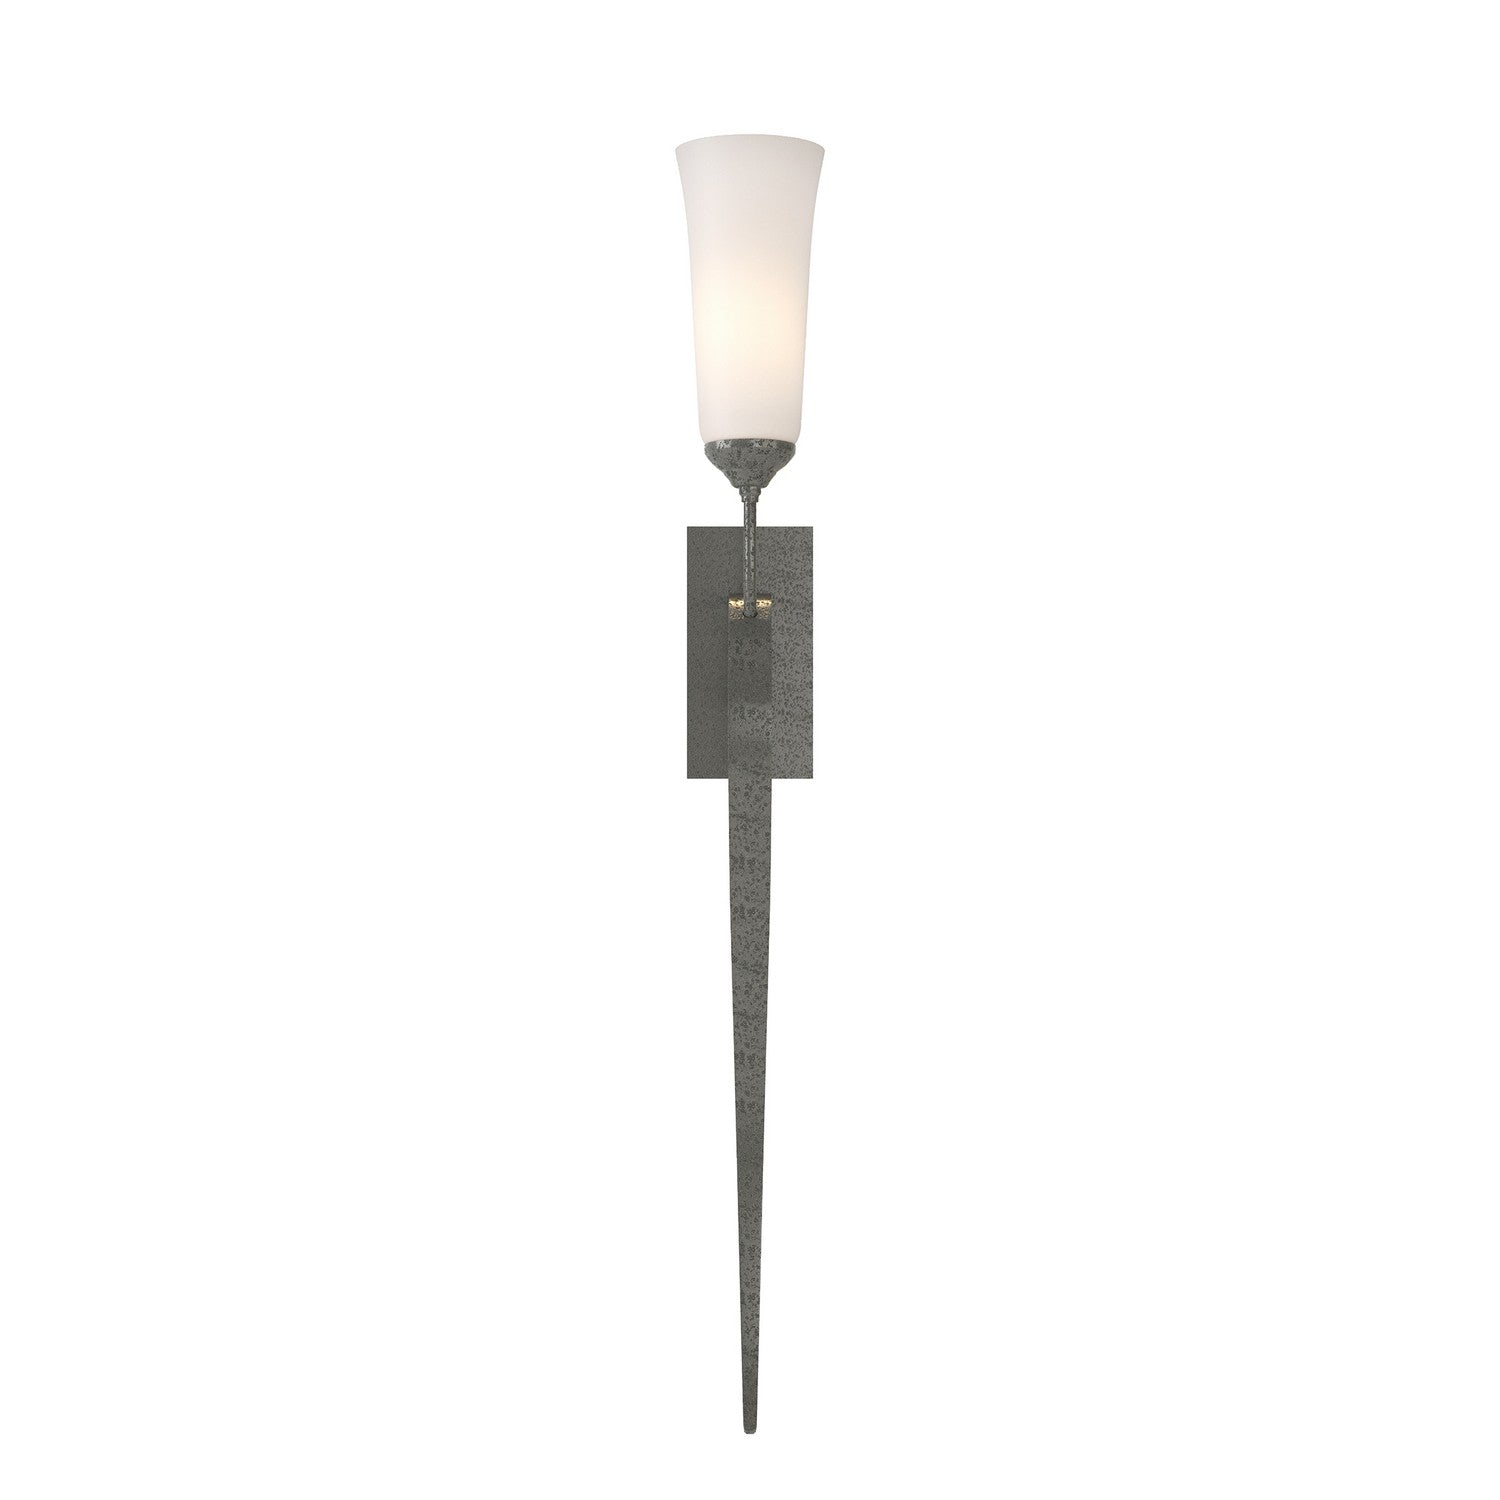 Hubbardton Forge - One Light Wall Sconce - Sweeping Taper - Natural Iron- Union Lighting Luminaires Decor